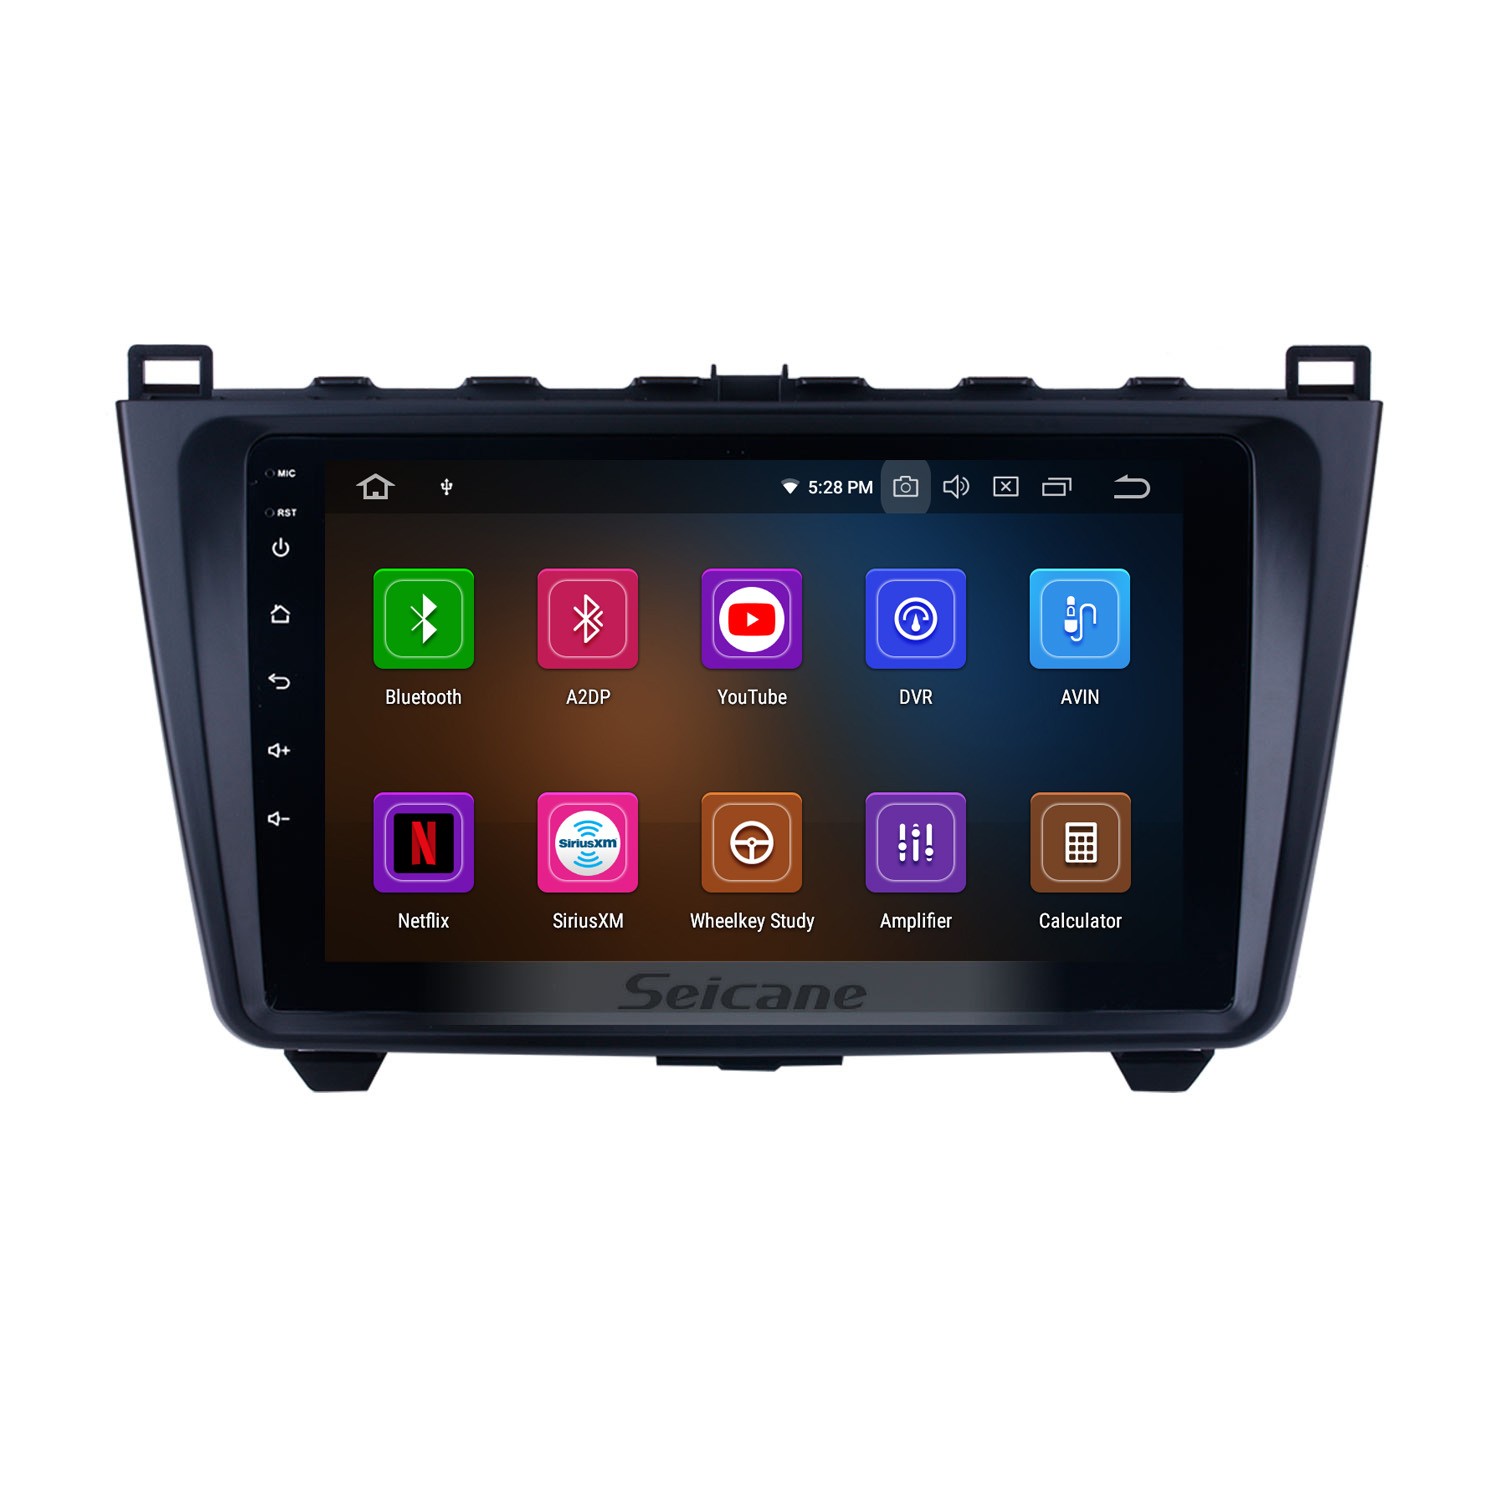 DVR GPS 6 13.0 System wing Rearview camera Navigation inch Android Mazda OBD2 Bluetooth link Rui TV with Mirror carplay Radio 9 2008-2015 for 1024*600 full Touchscreen TPMS